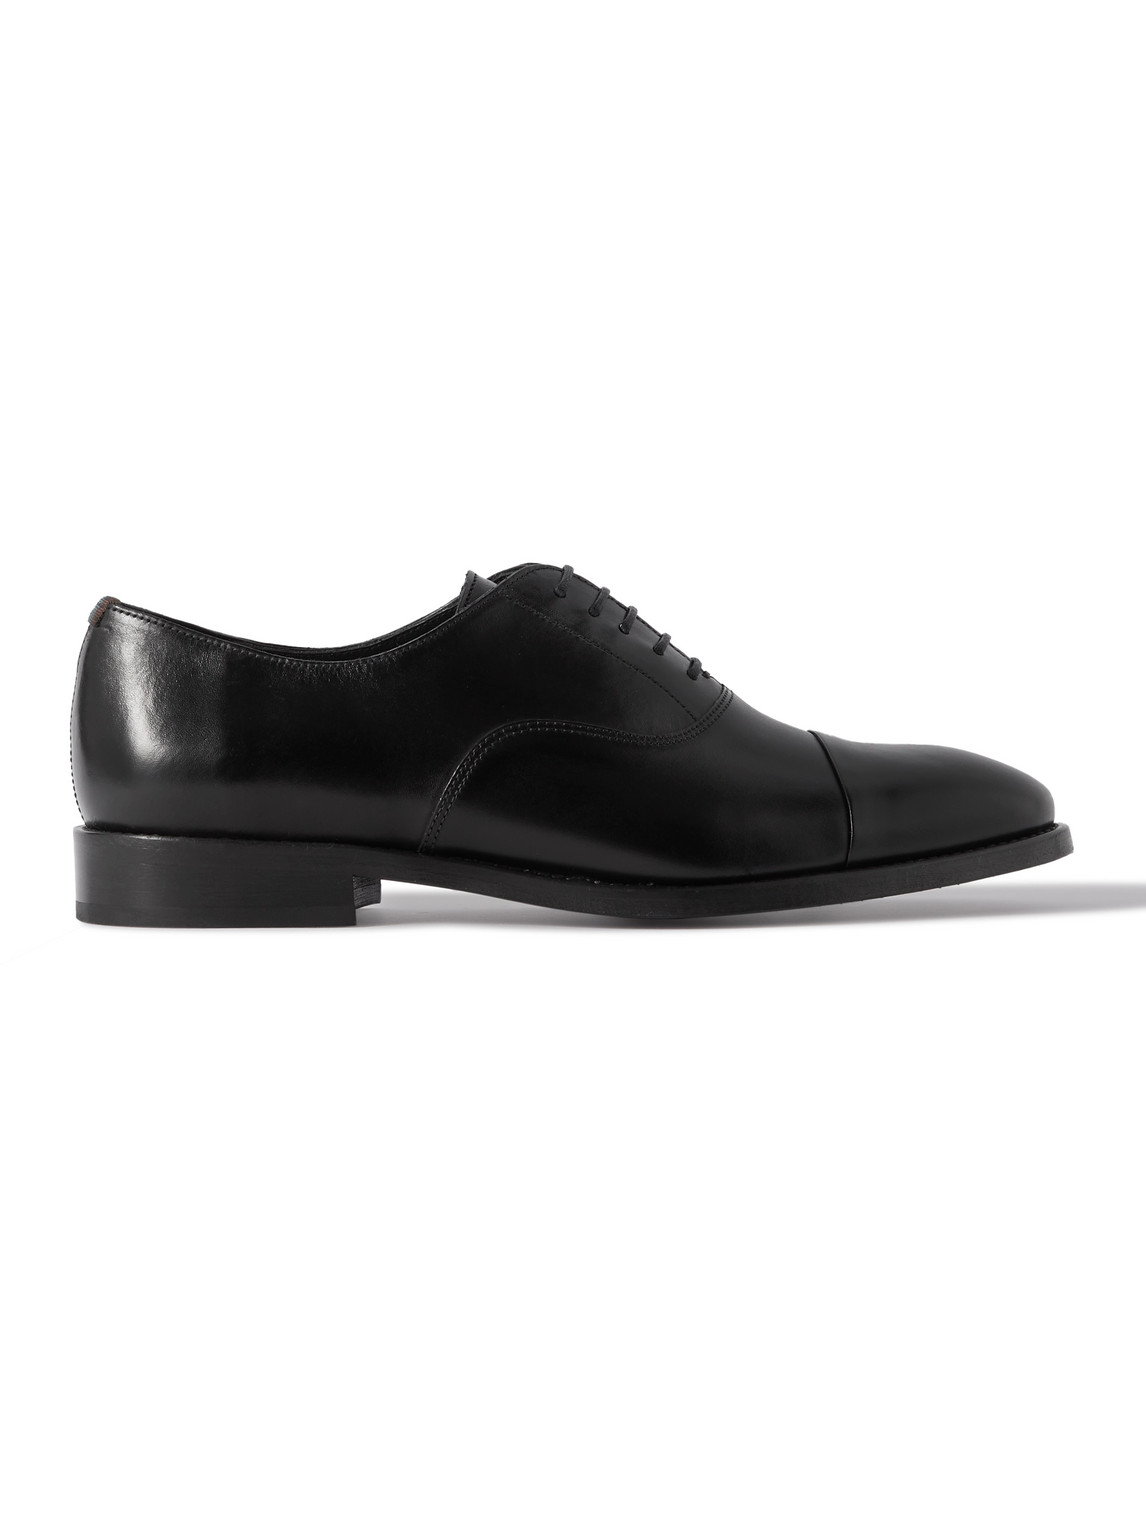 Paul Smith Bari Leather Oxford Shoes In Black